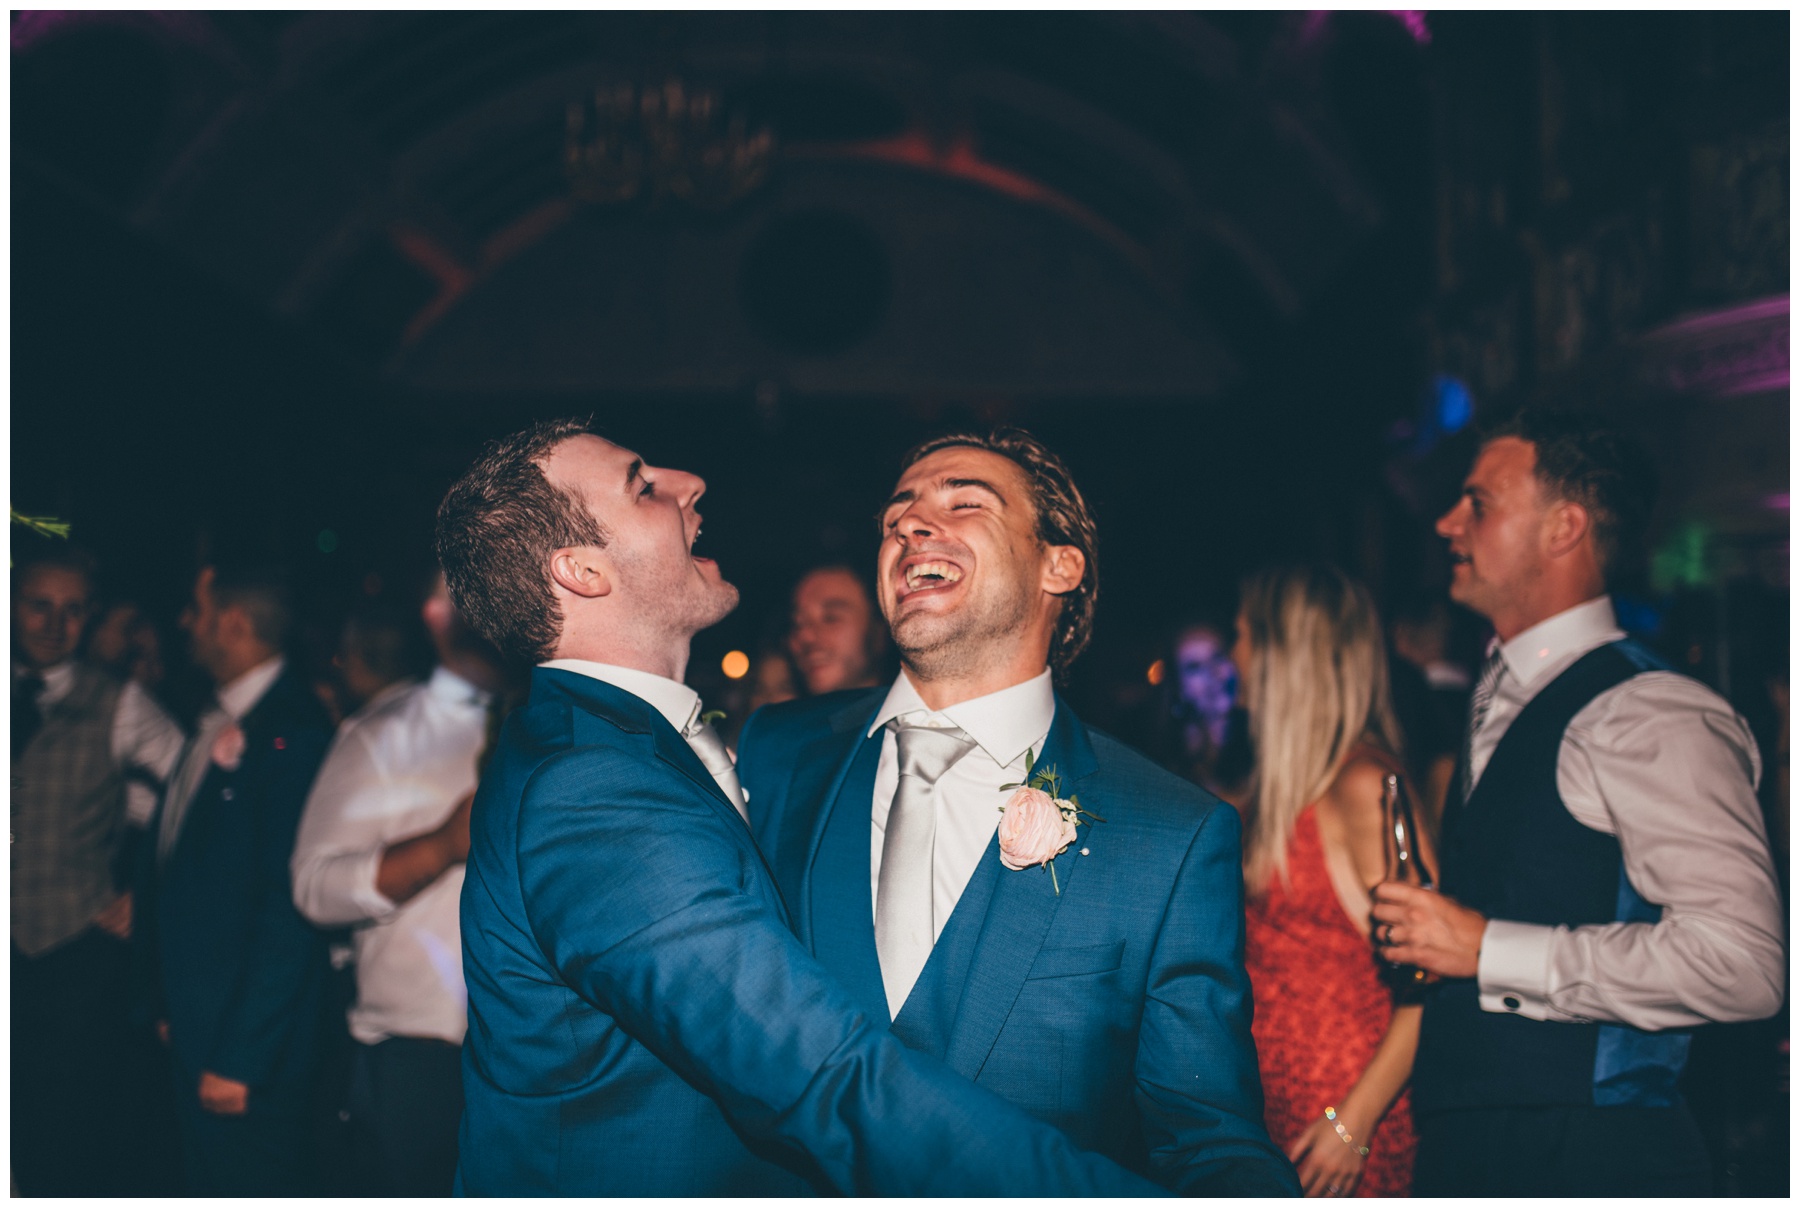 The groom and his Best Man dance and sing and have fun together at Thornton Manor wedding in Cheshire.